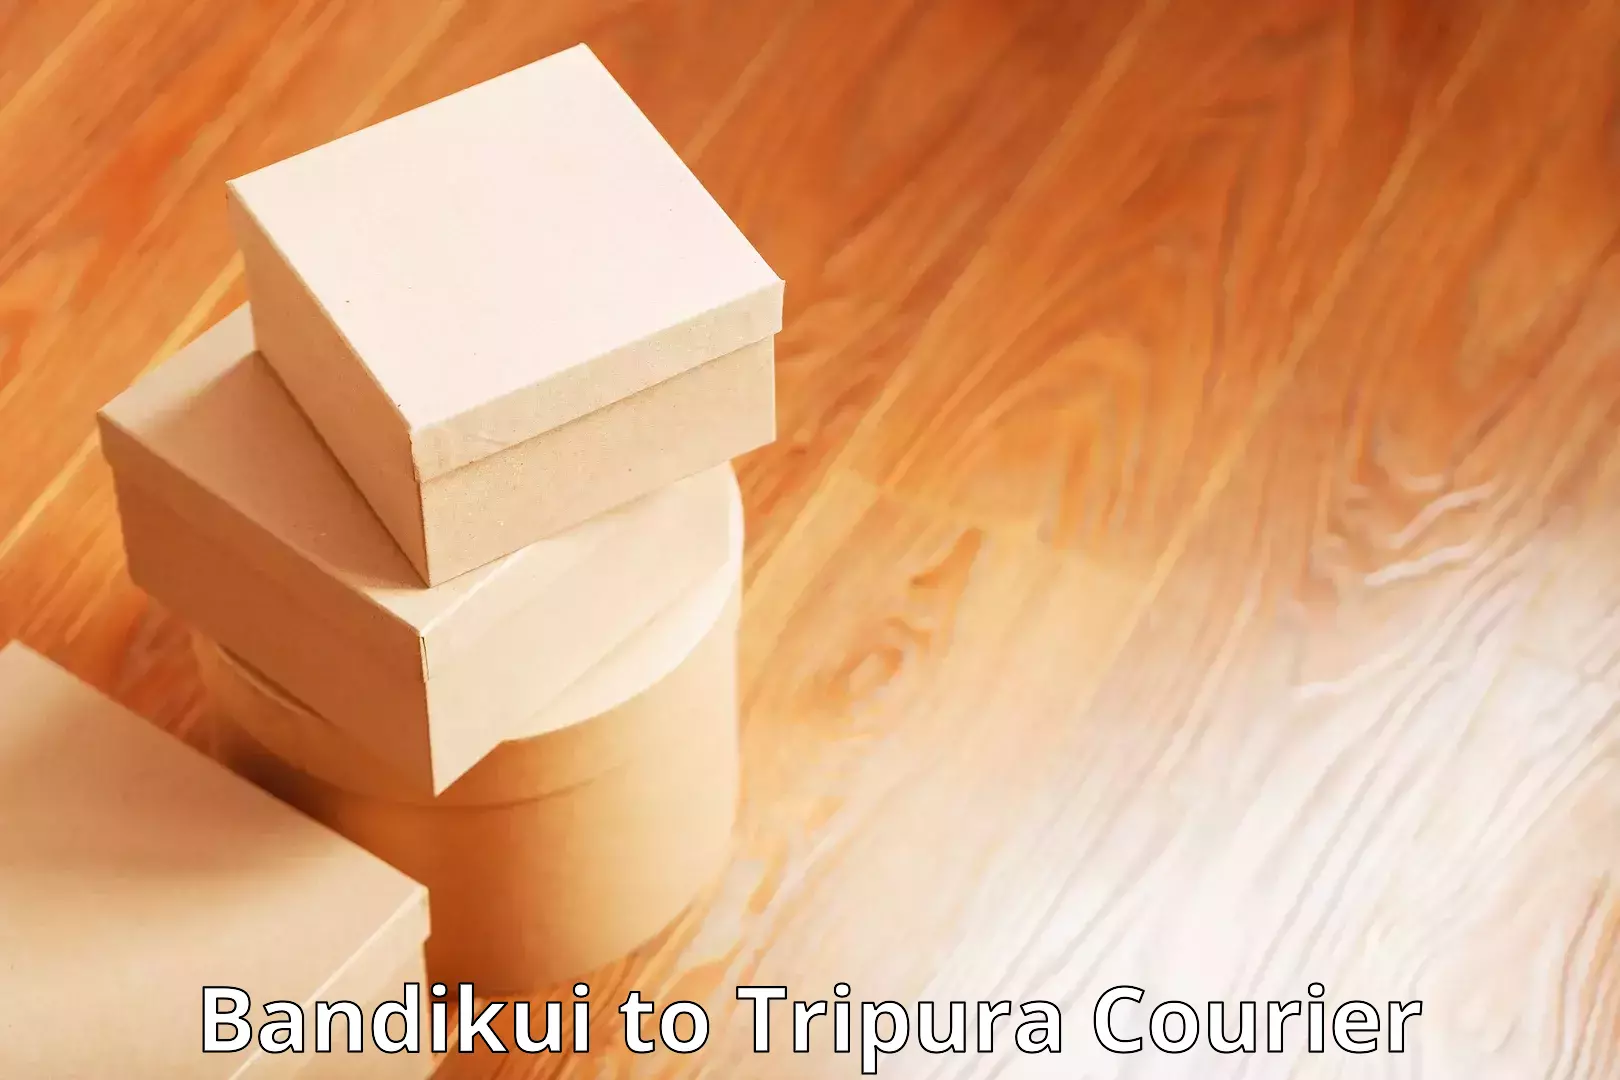 Express delivery capabilities Bandikui to Tripura